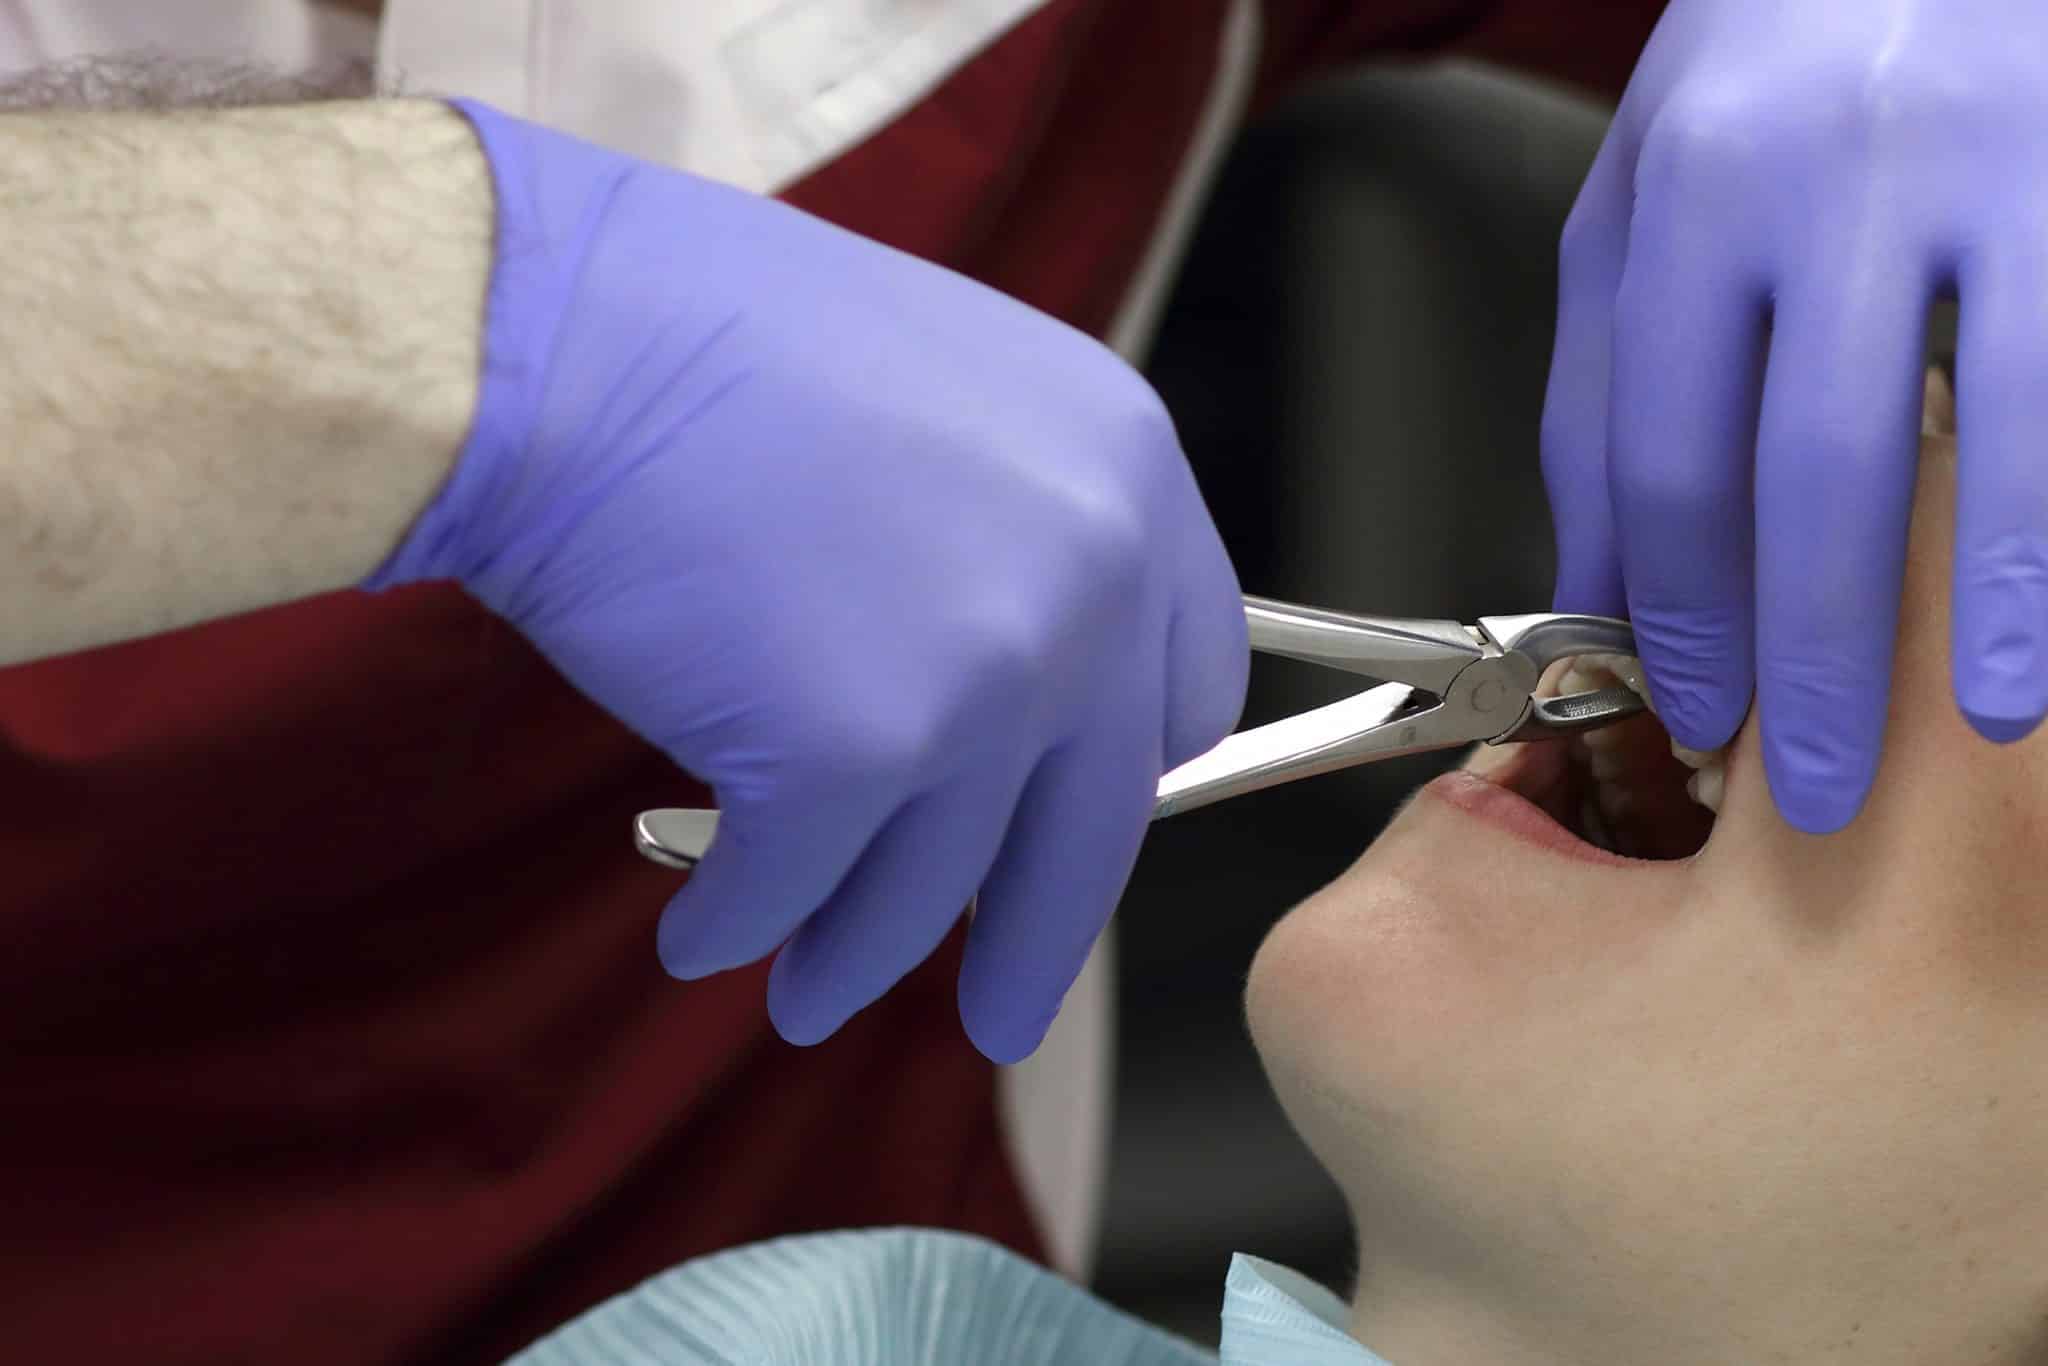 A photograph of a person getting a dental extraction.